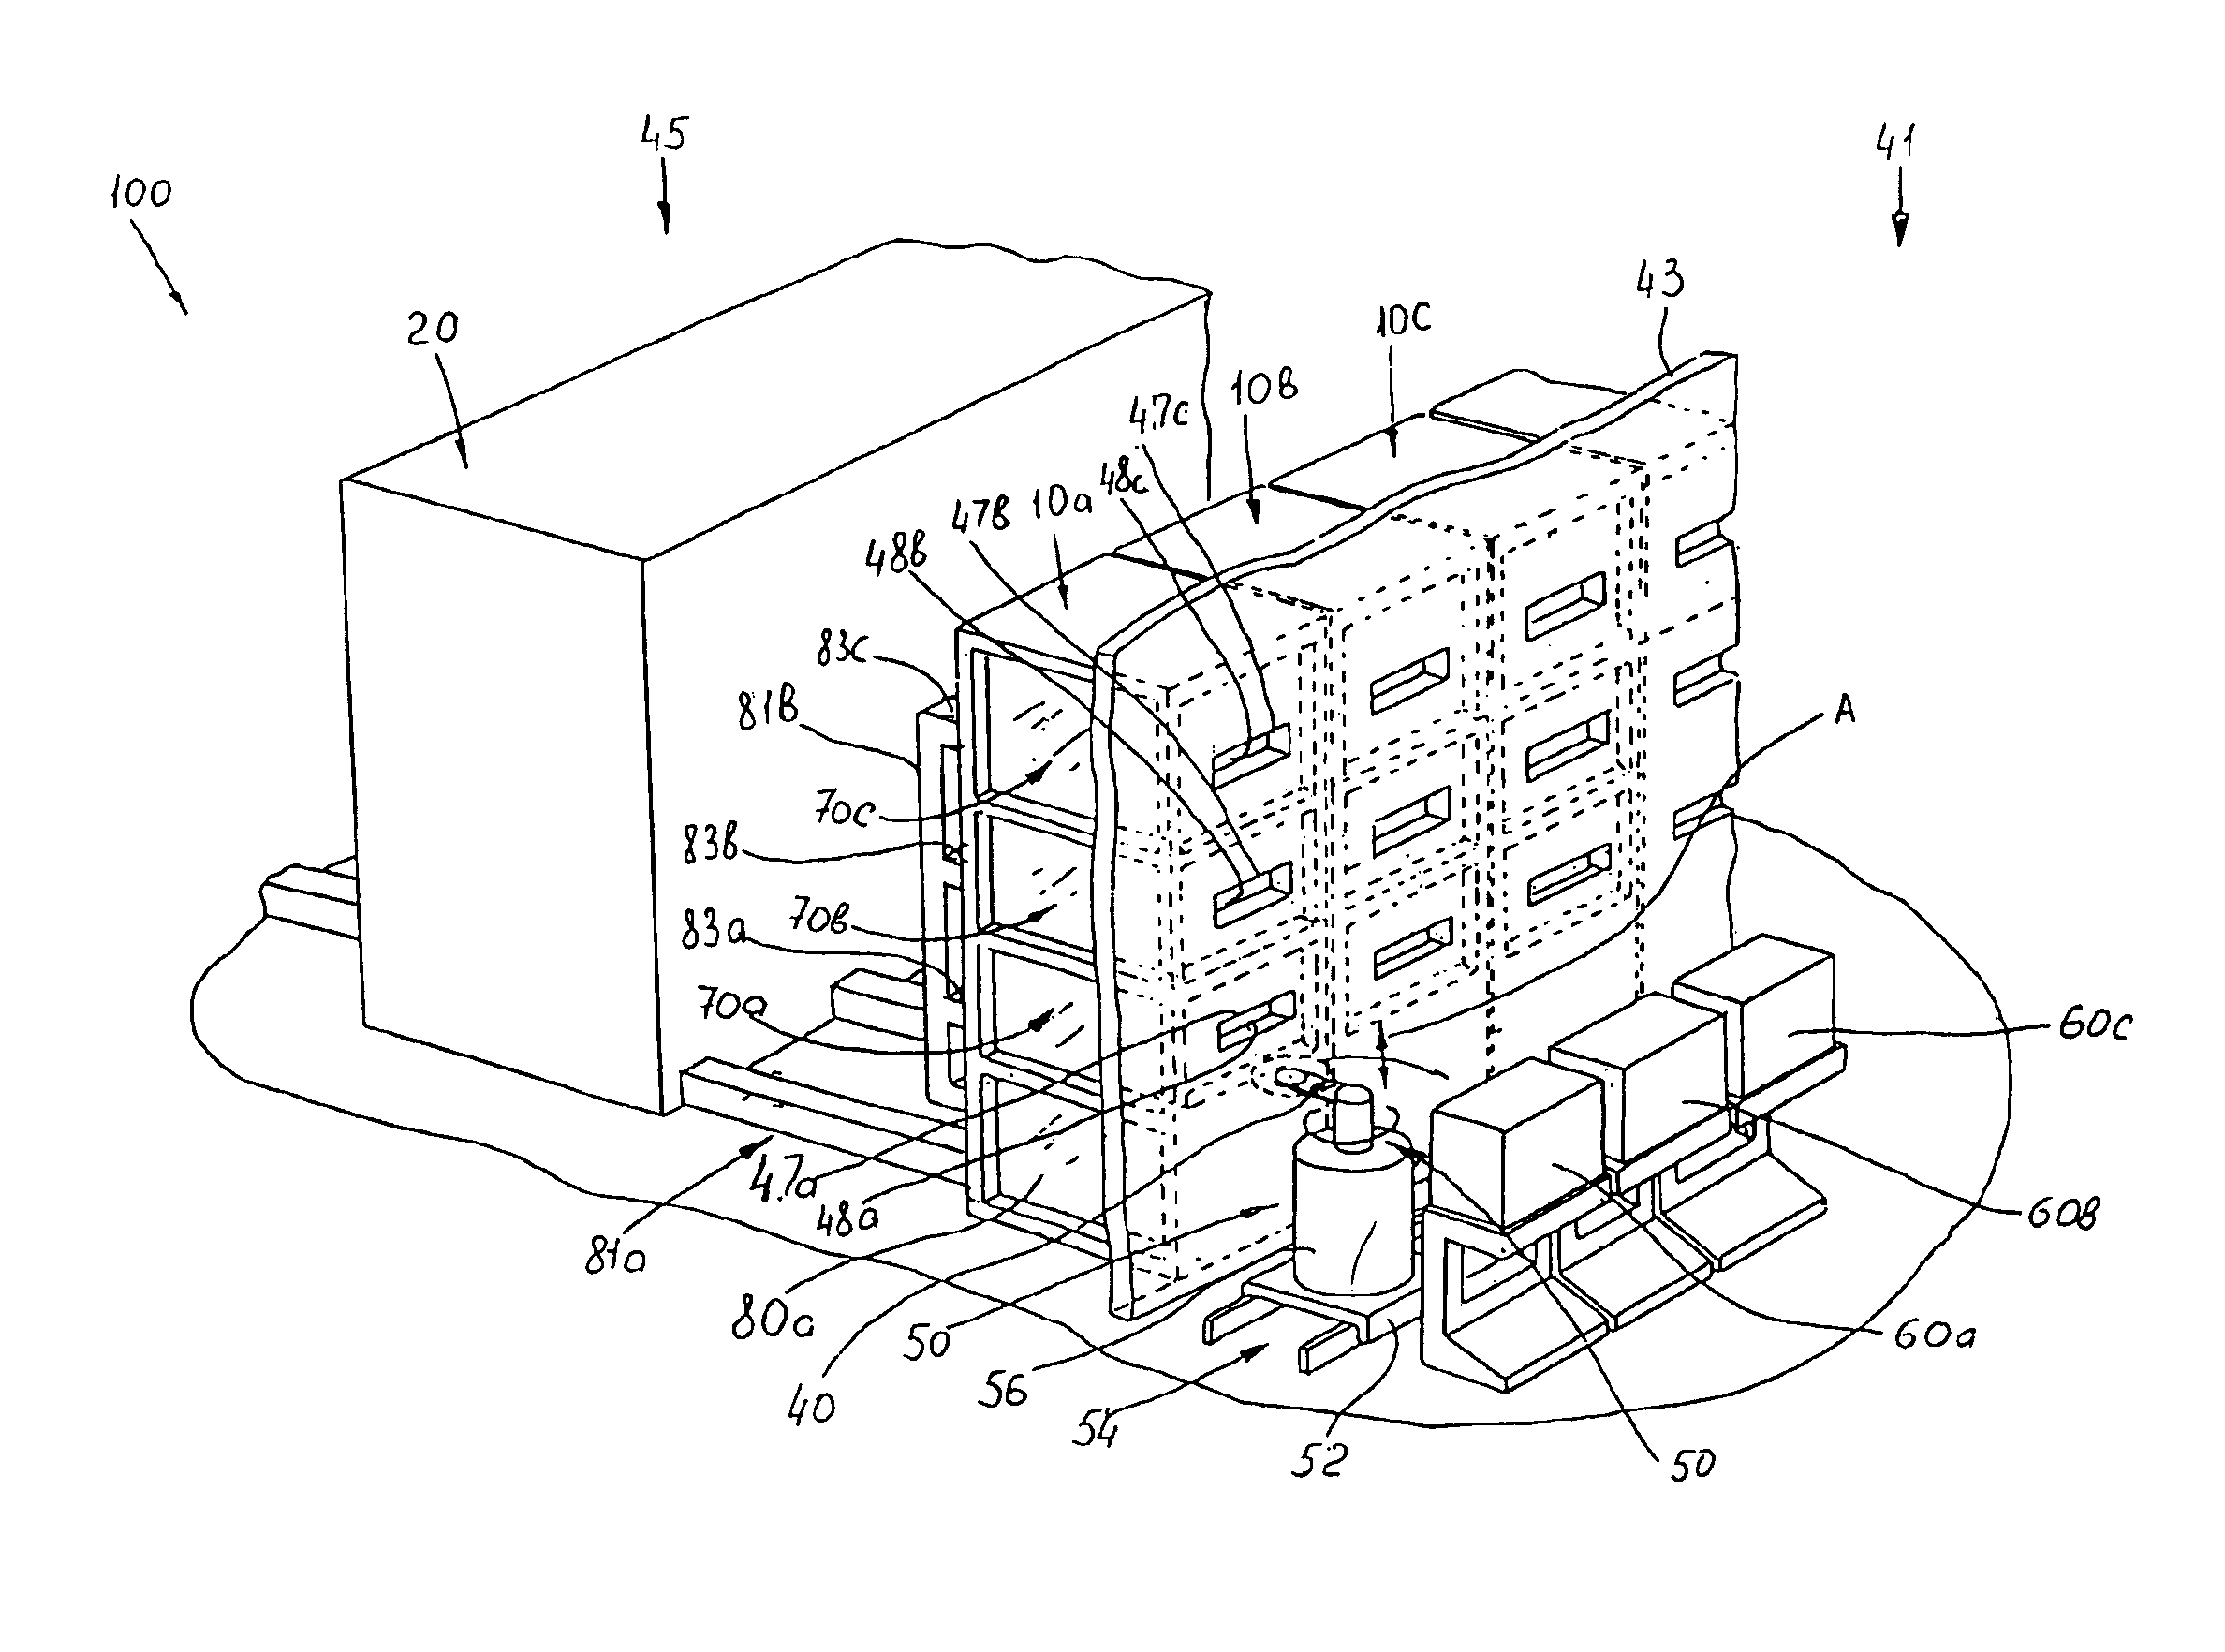 Spatially-arranged chemical processing station